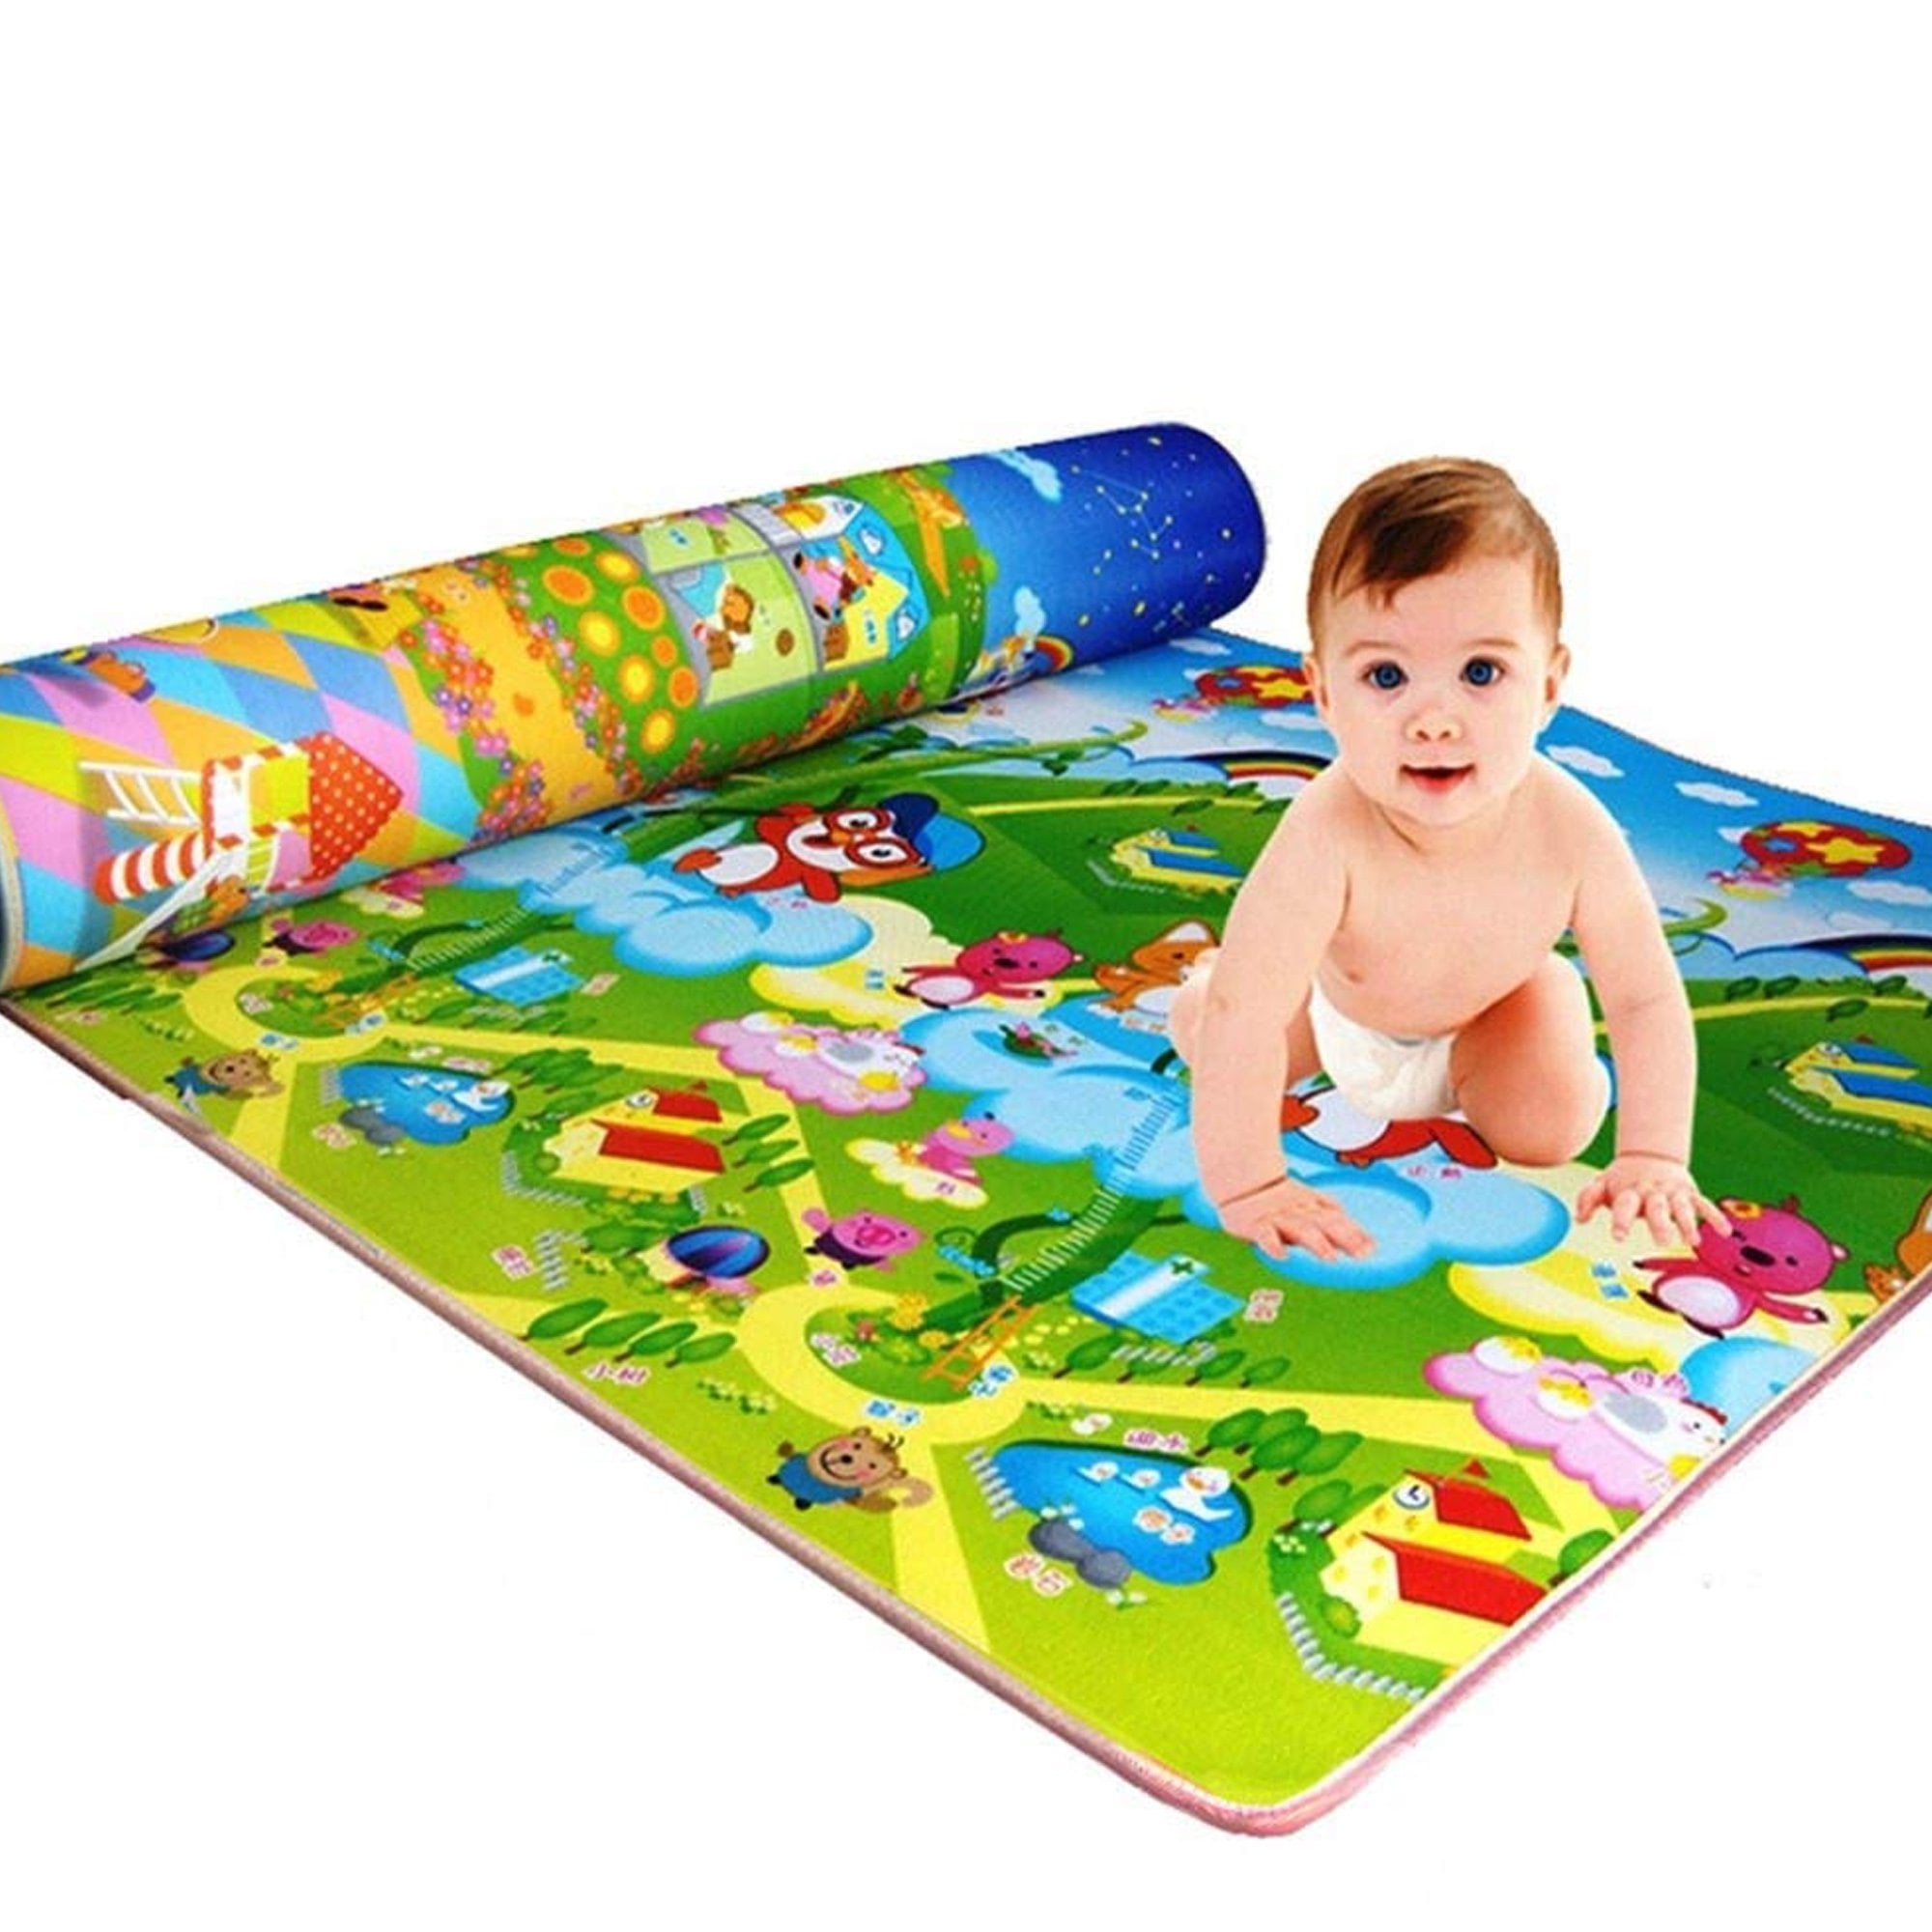 Yay Mats Pure Yay All Purpose Cleaning Wipes for Baby Play Mats